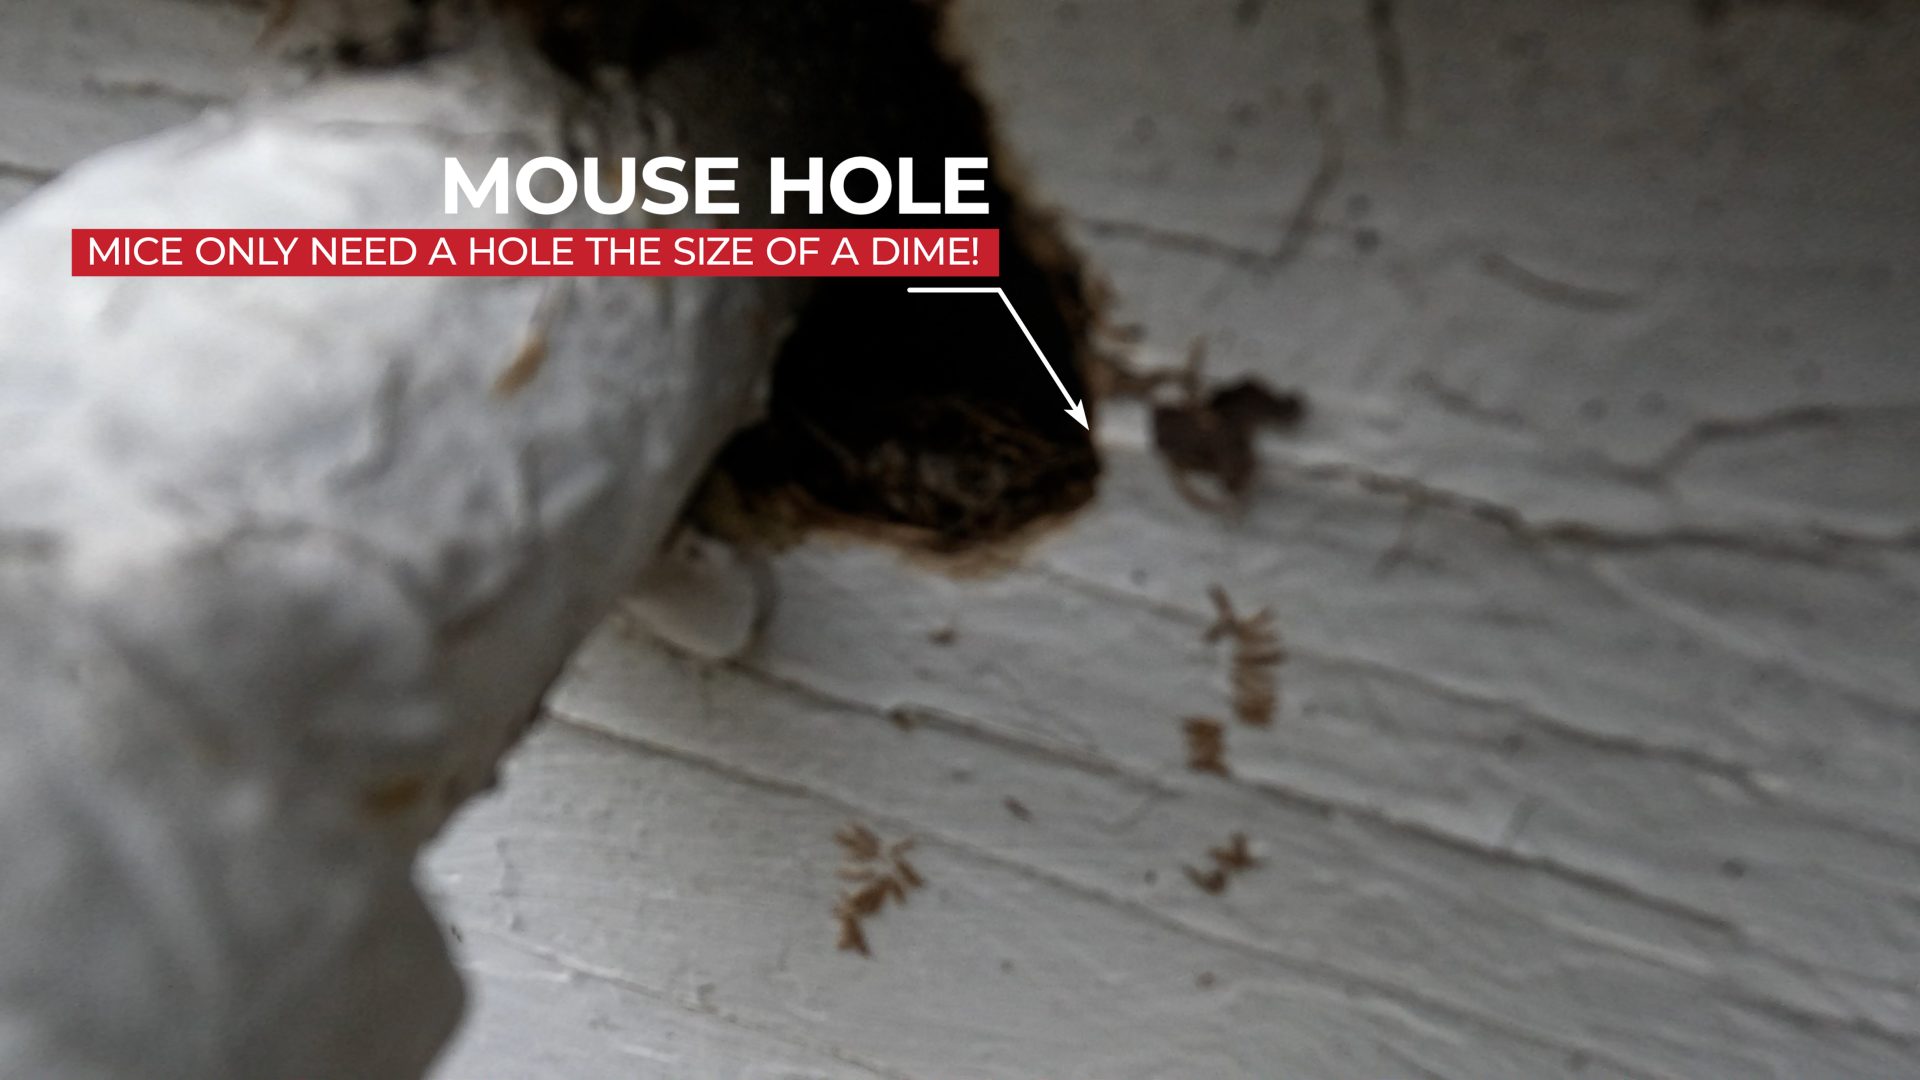 Mice only need holes the size of a dime to enter your home!